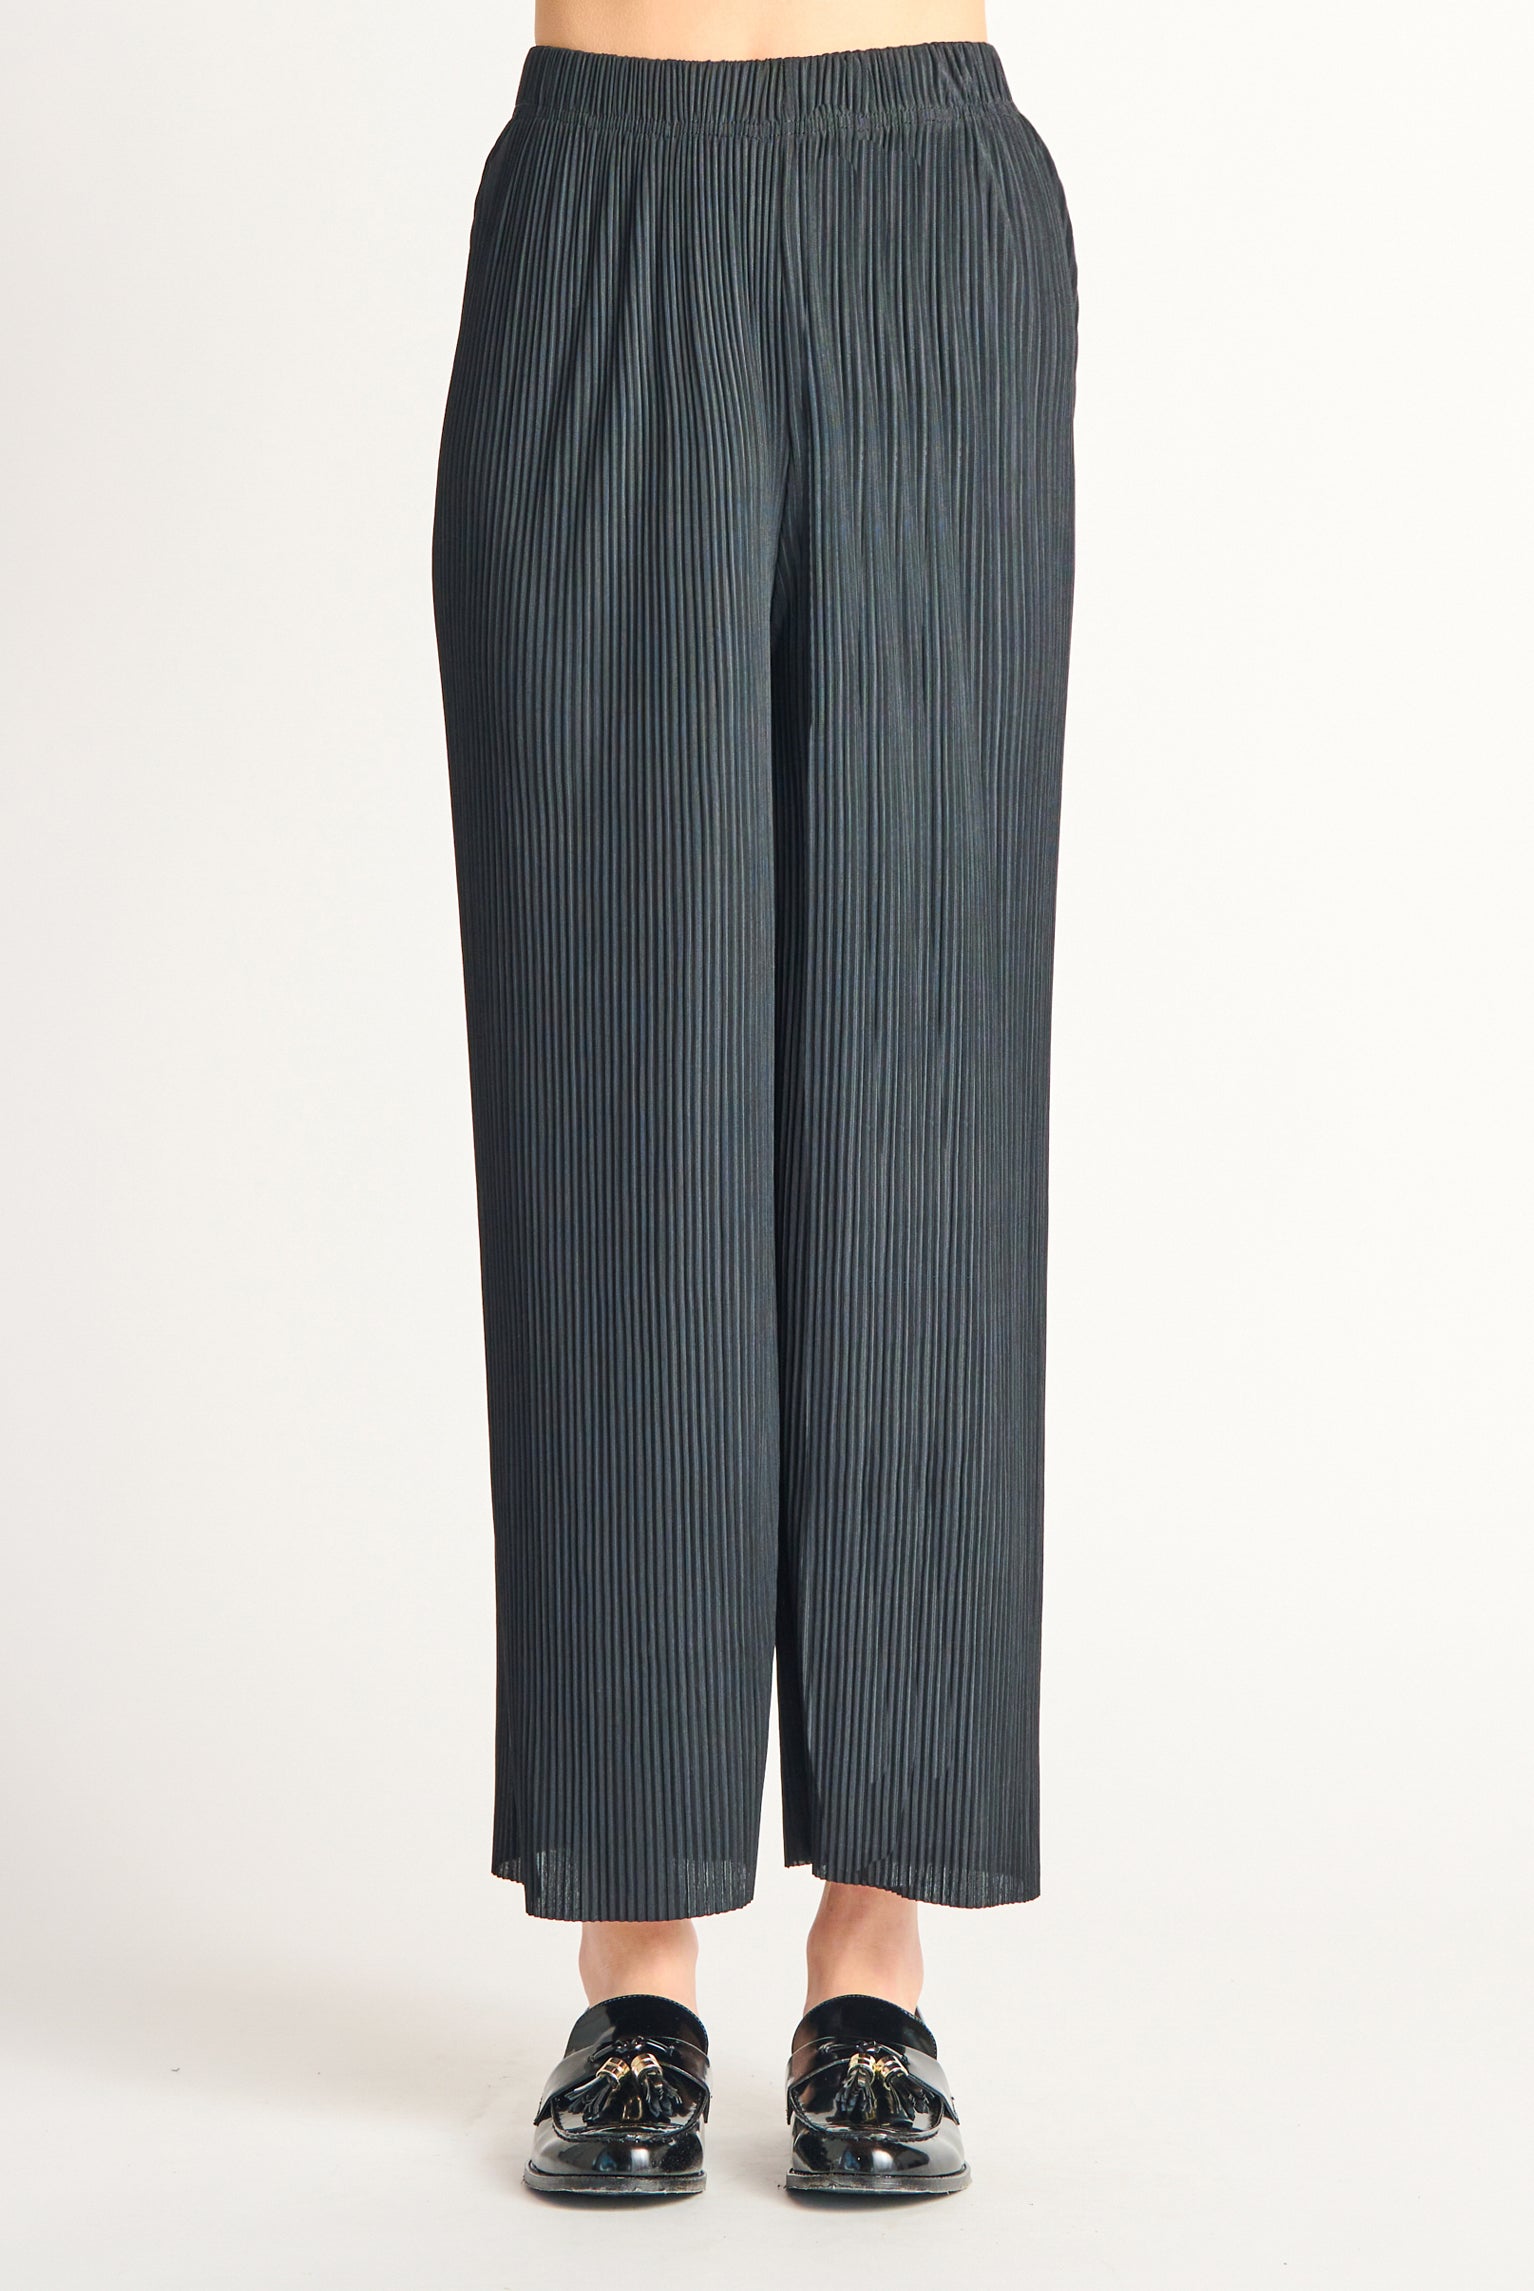 On Trend Pleated Pant, Black-Pants-Vixen Collection, Day Spa and Women's Boutique Located in Seattle, Washington